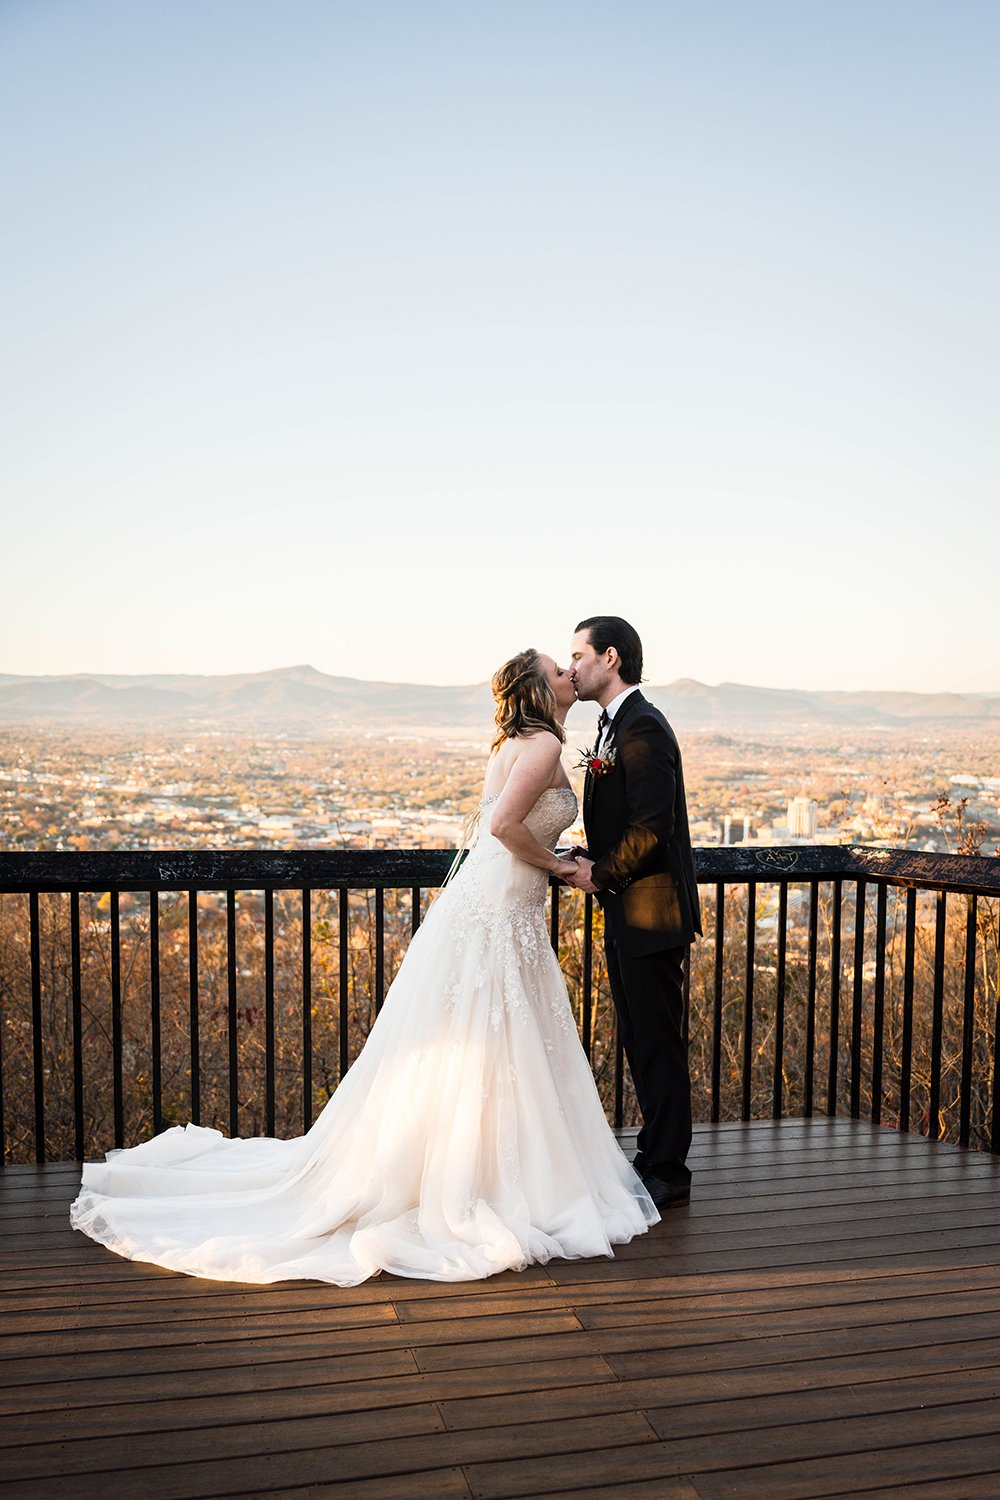 A couple on their elopement day has their first kiss at the Rockledge Overlook in Southwest Virginia, overlooking Downtown Roanoke and with the Blue Ridge Mountains vista in the background.